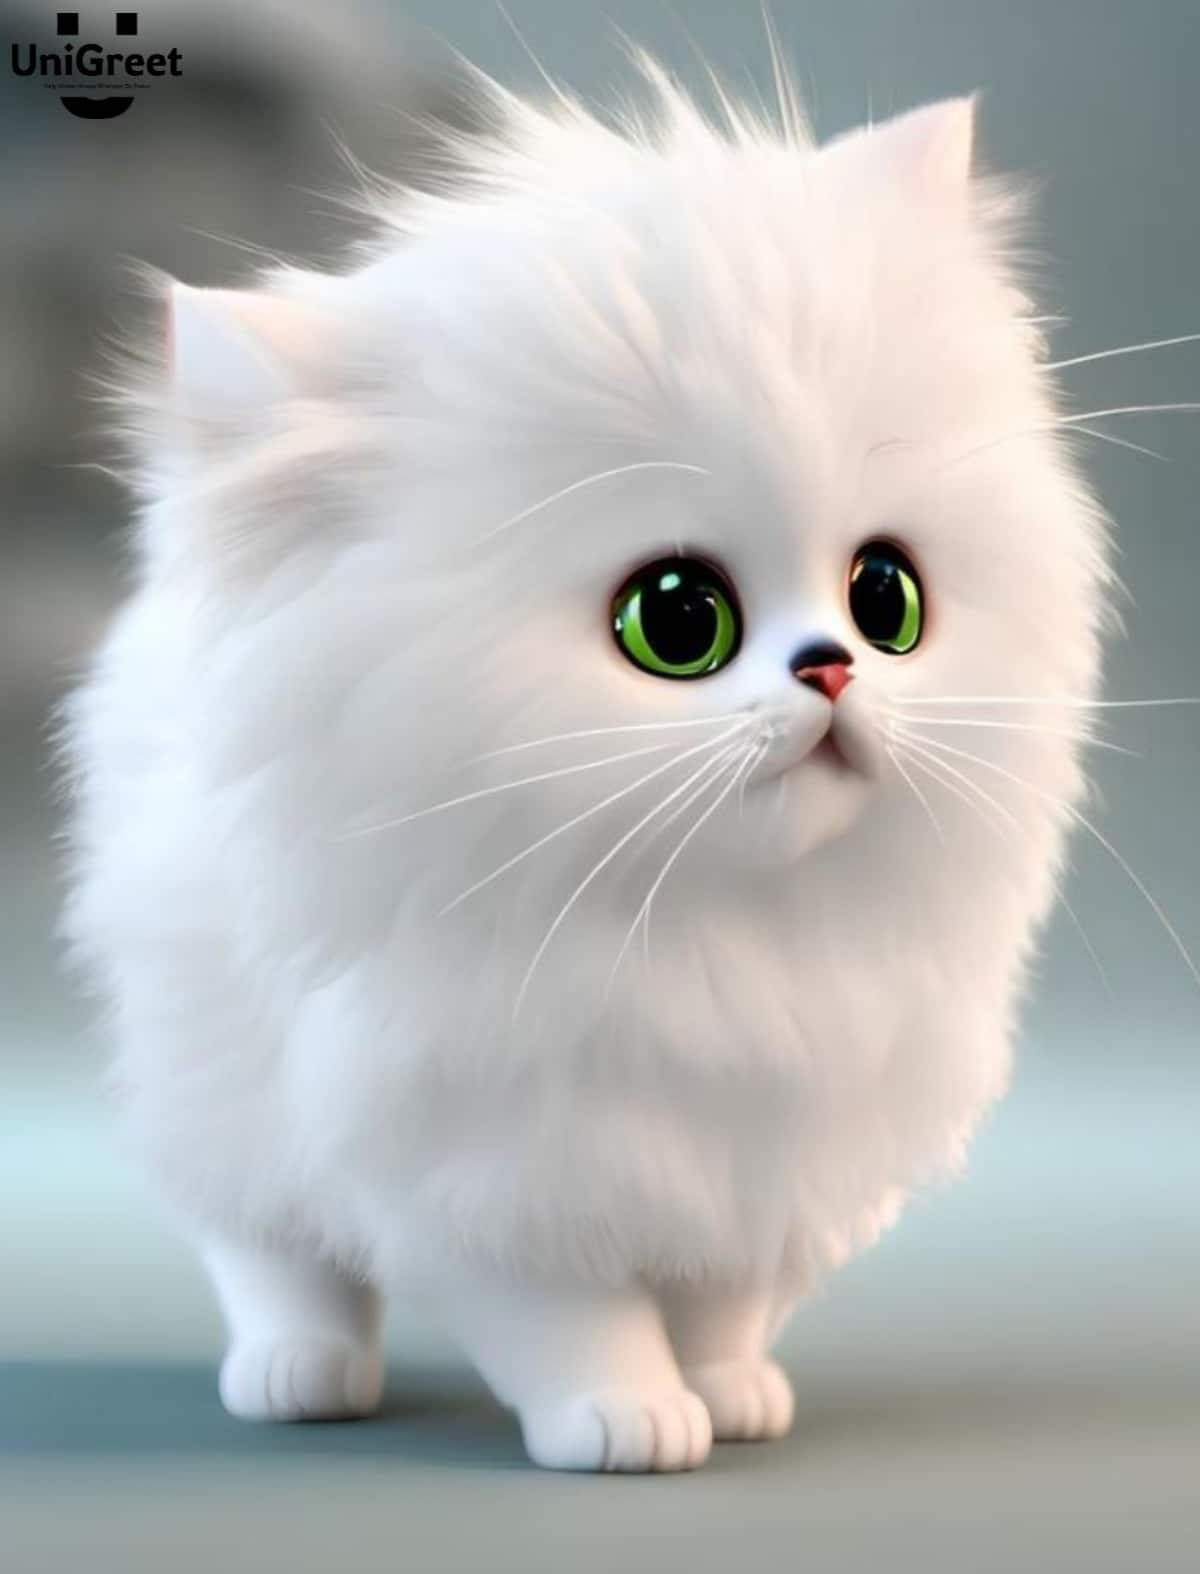 hd wallpapers of cute cats